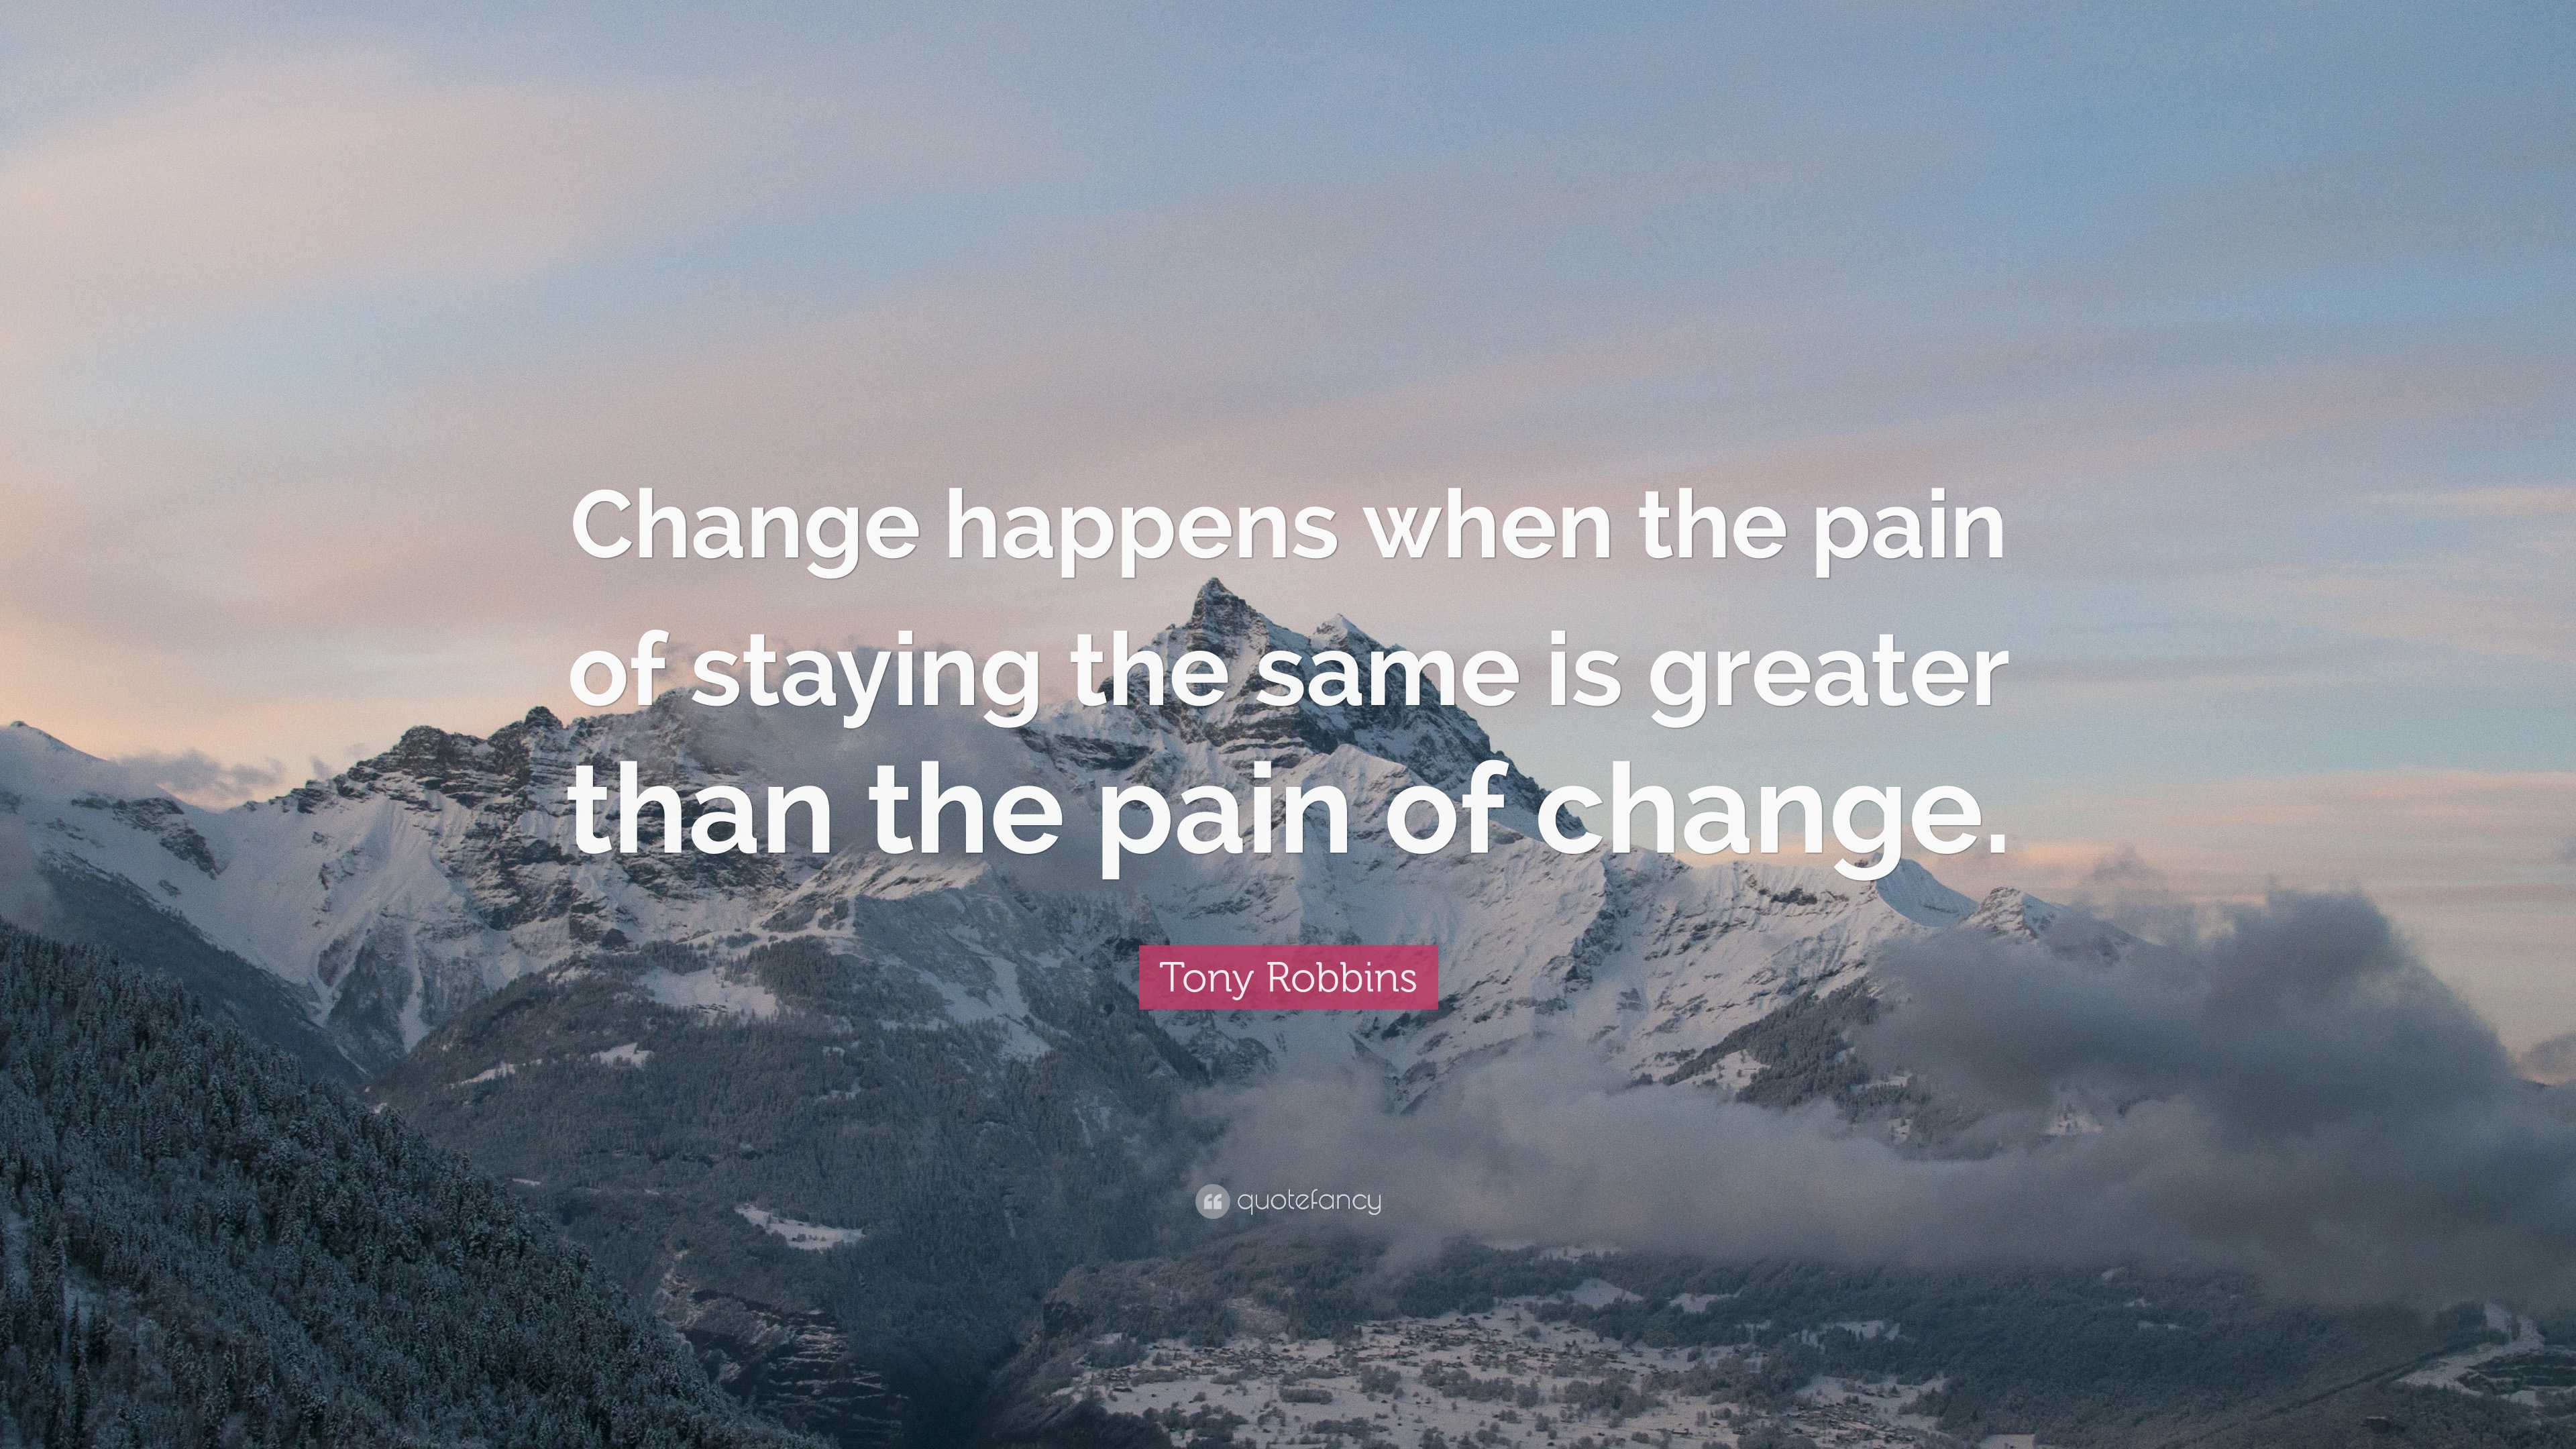 Tony Robbins Quote: “Change happens when the pain of staying the same ...